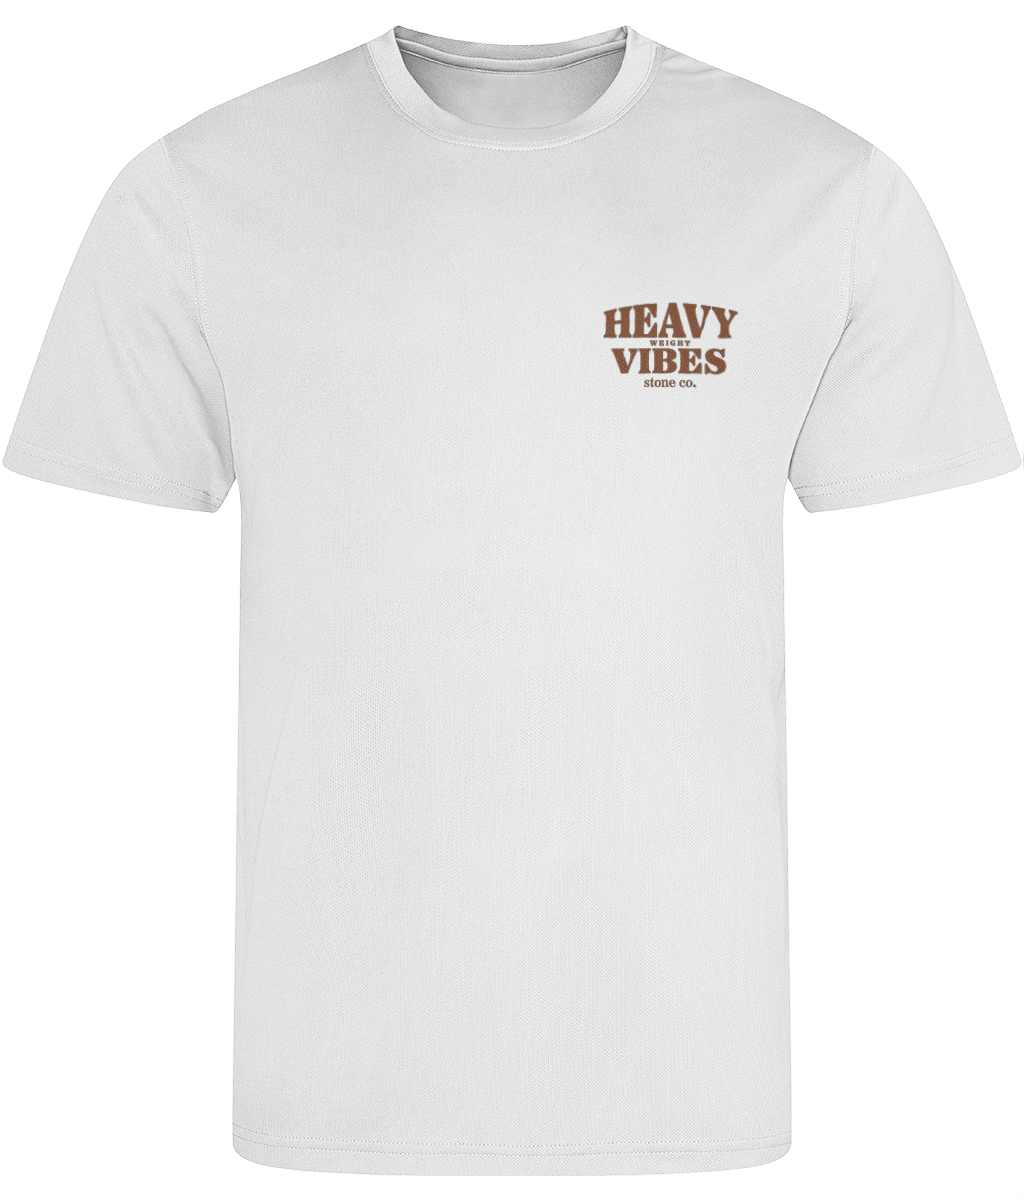 Heavy vibes active t-shirt